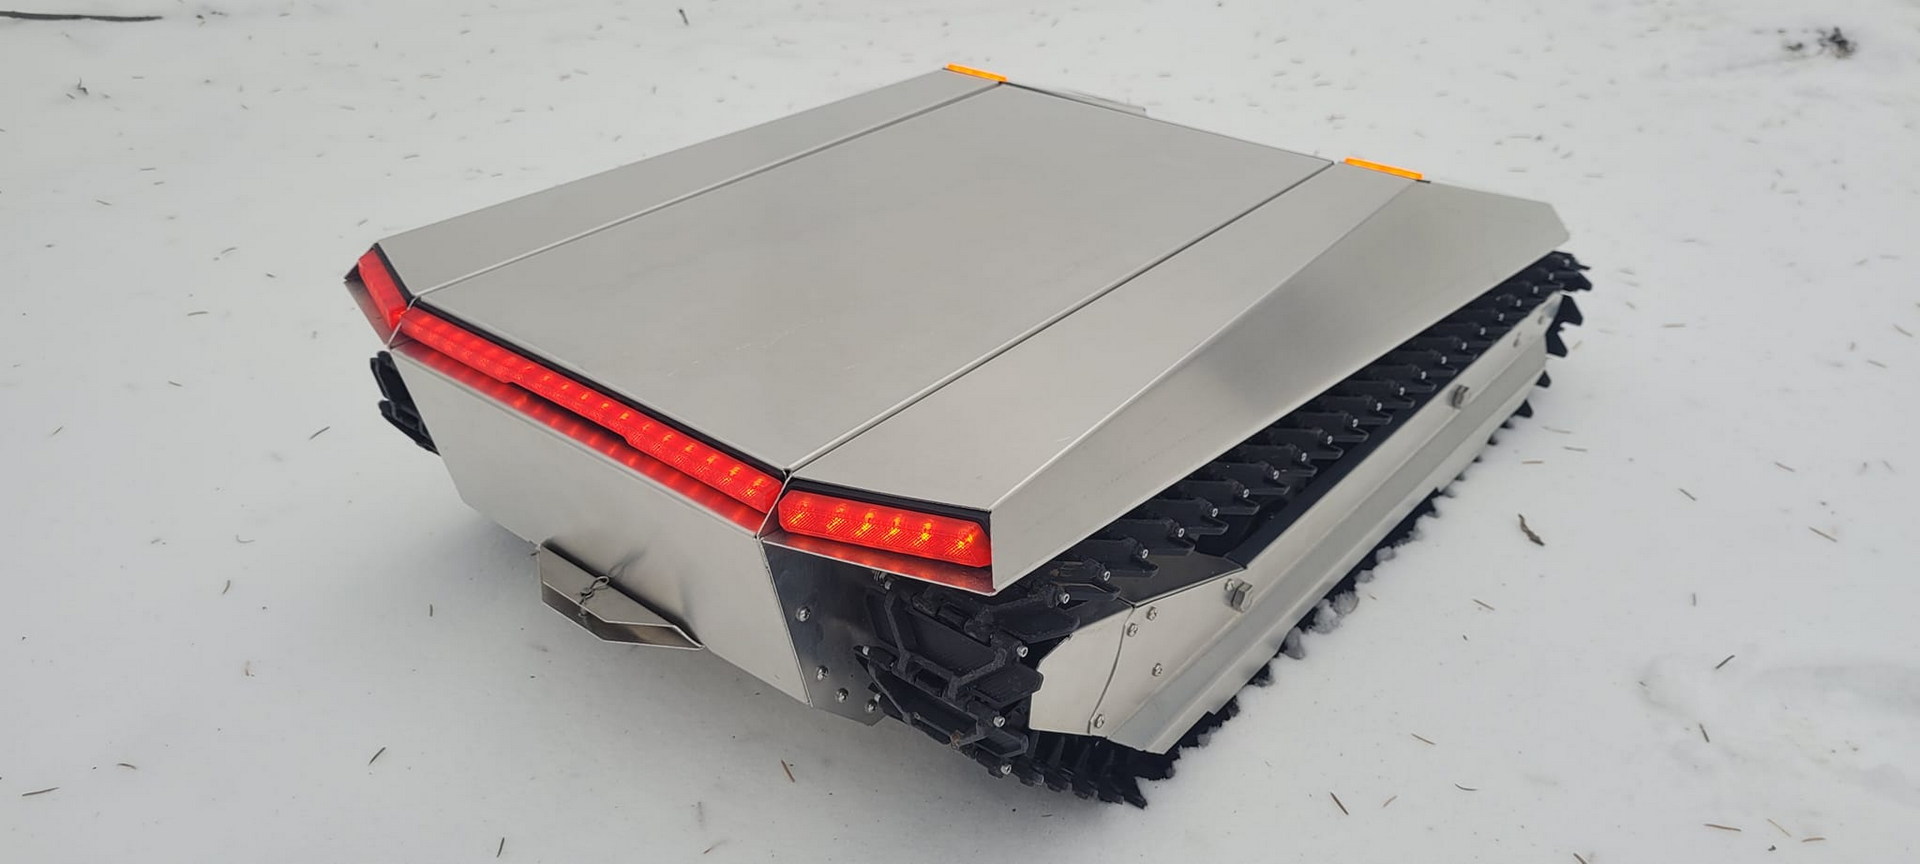 This remote-controlled snowblower is inspired by Tesla's Cybertruck -  Autoblog